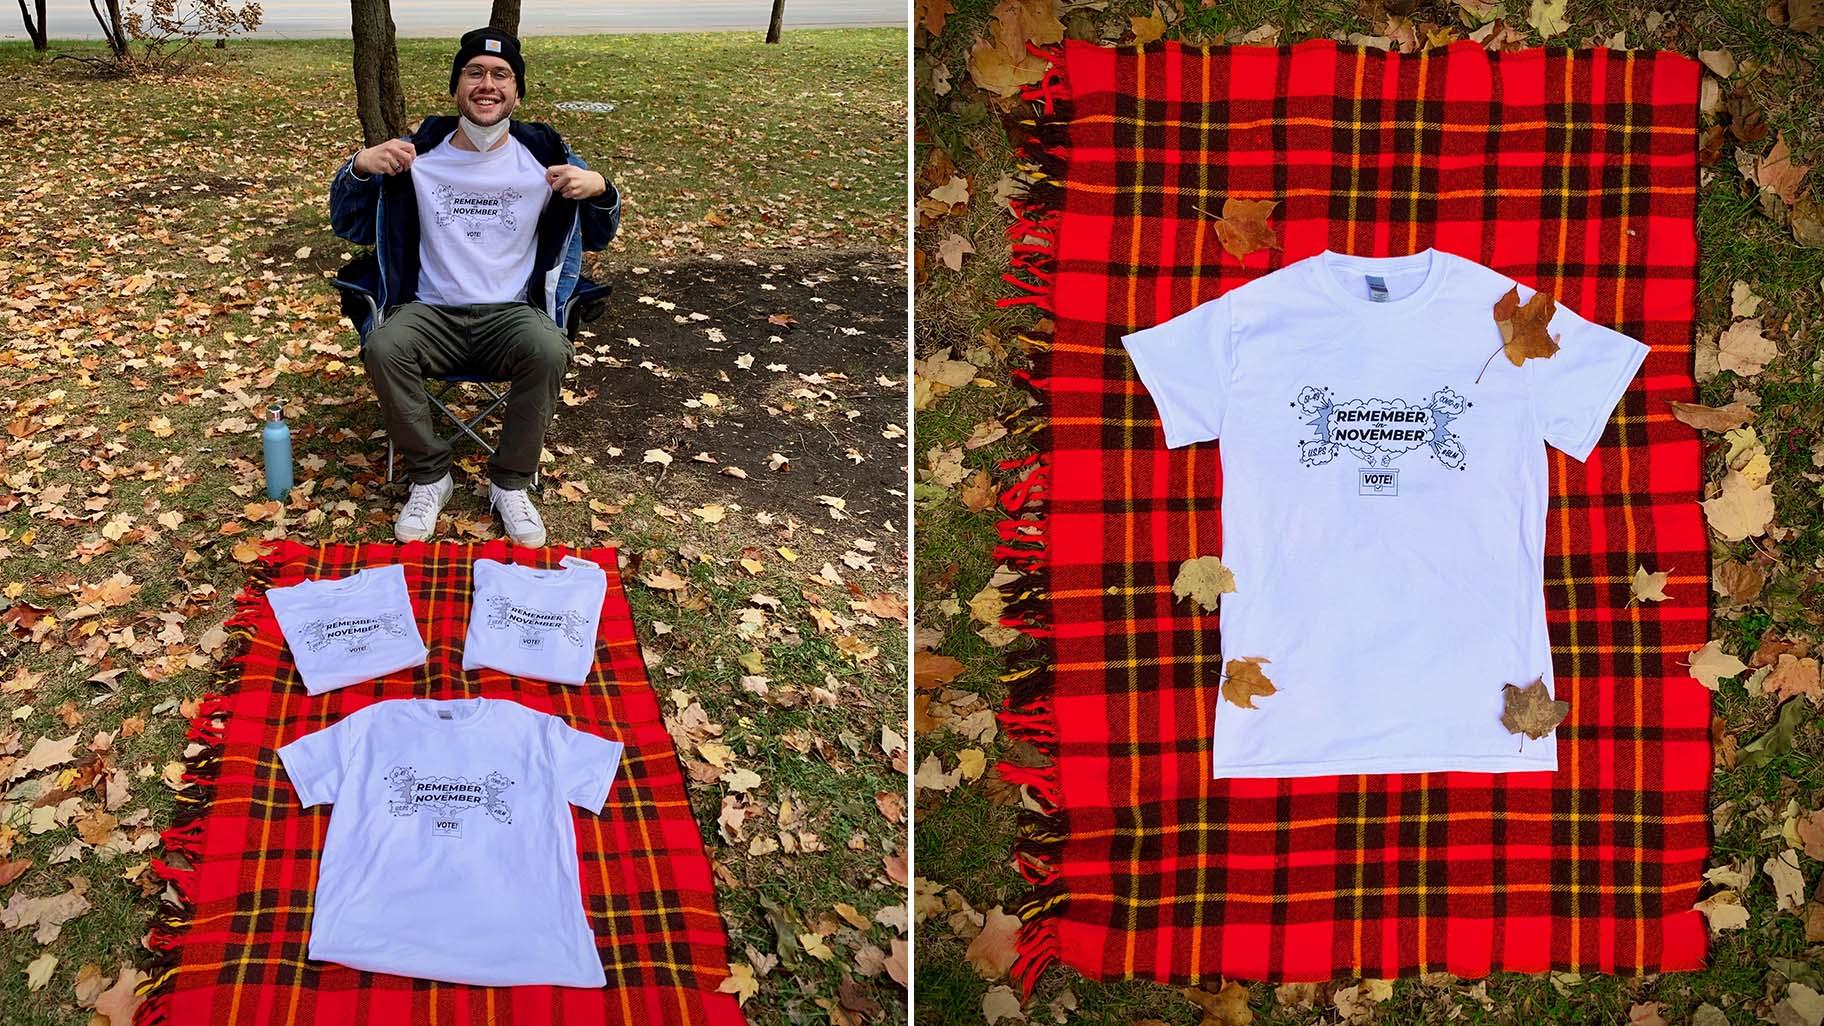 Left: Horace Nowell sells his shirts at the Logan Square Monument park on Oct. 4, 2020. (Ariel Parrella-Aureli / WTTW News) Right: A close-up of the T-shirt. (Courtesy of Horace Nowell)